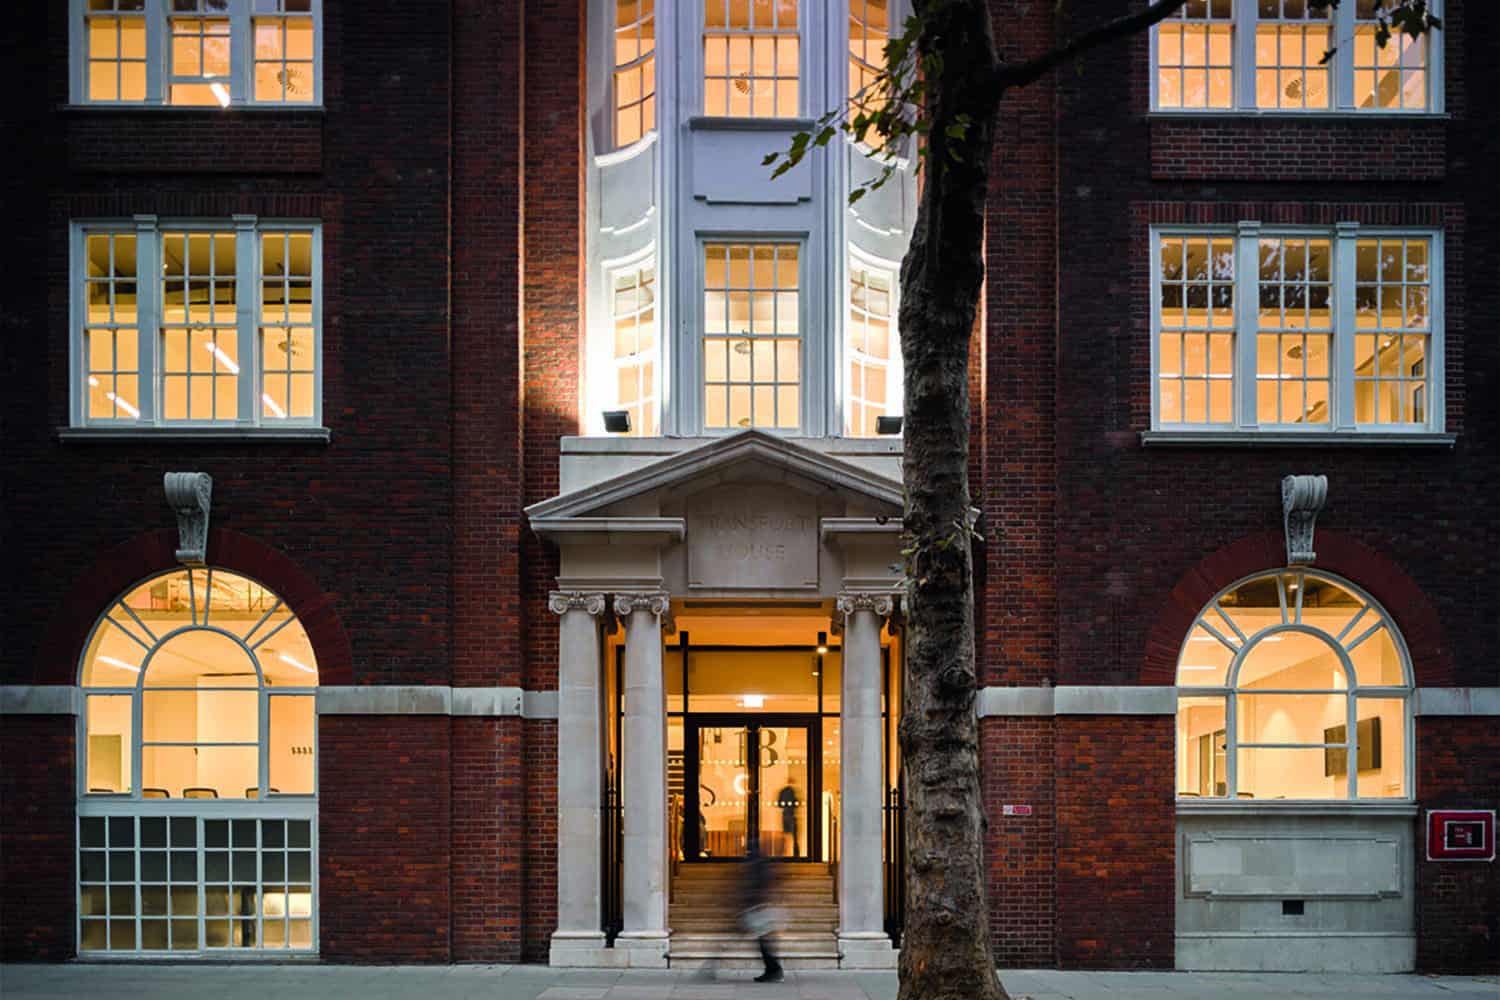 exterior evening shot of the LGA’s Smith Square offices, Westminster